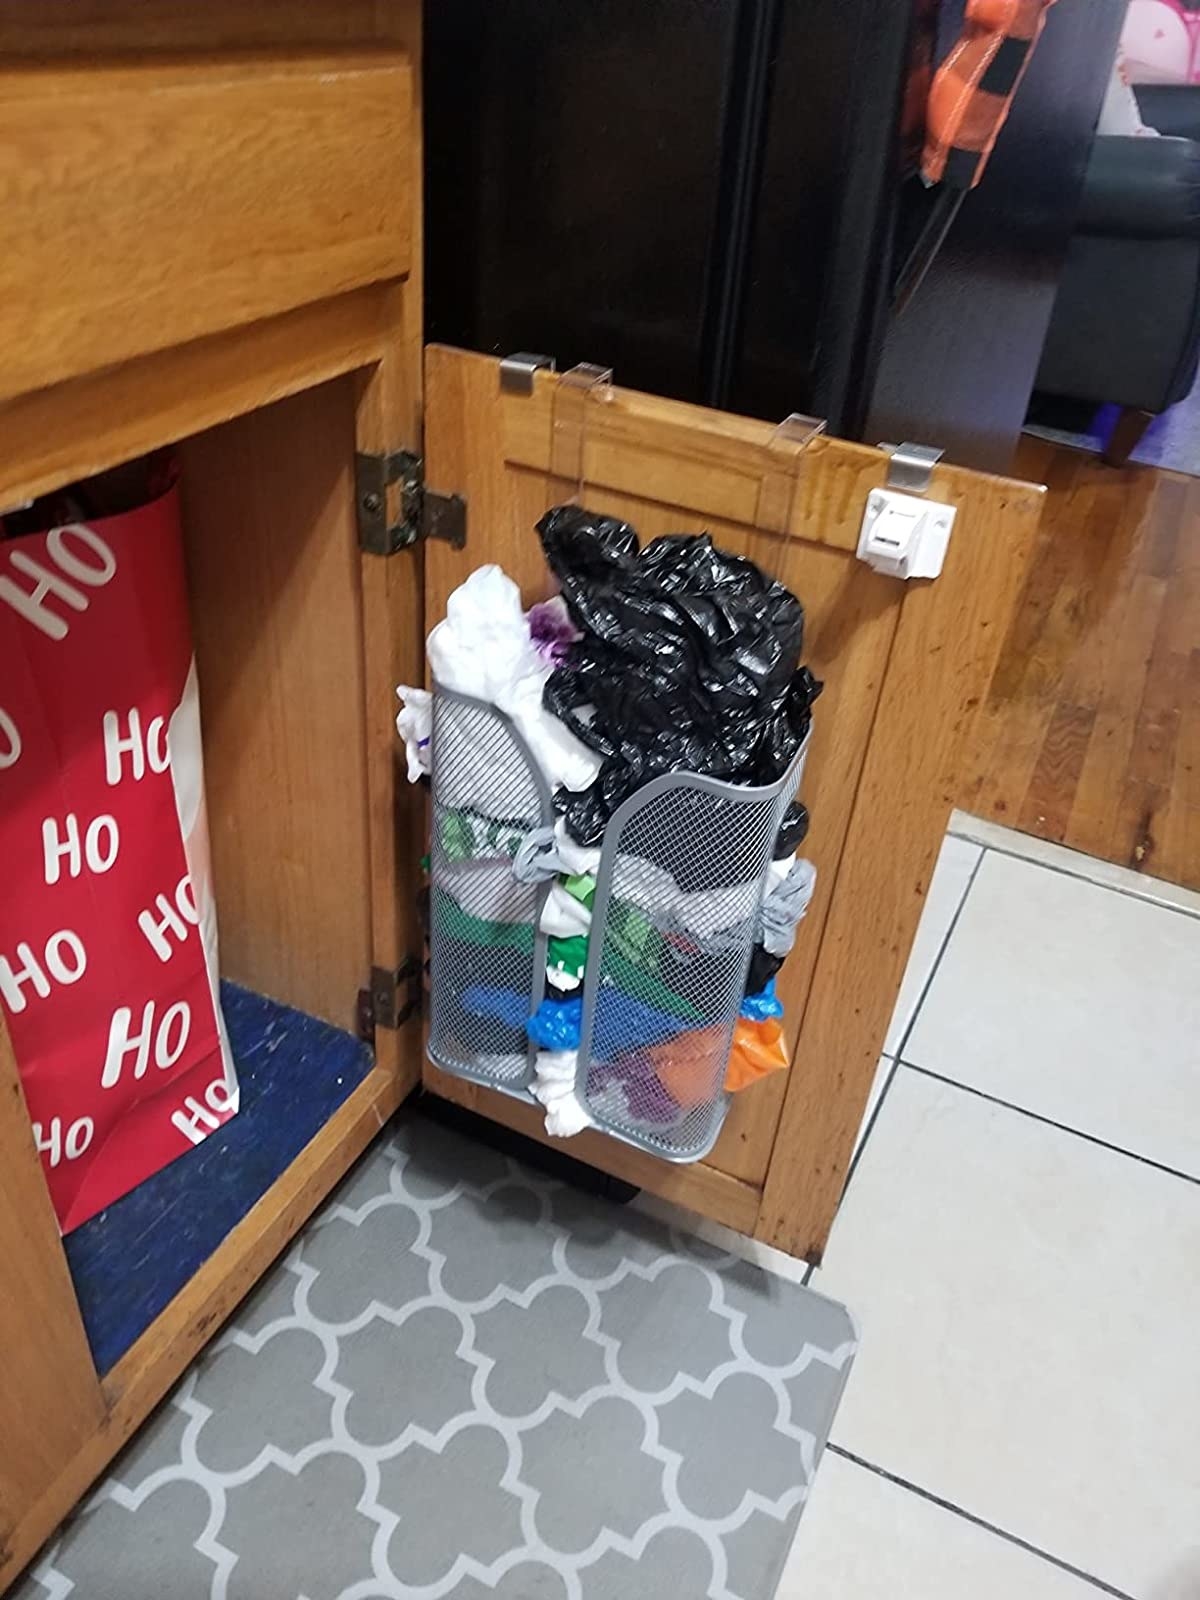 A cabinet door with a bag holder attached to the inside holding shopping bags